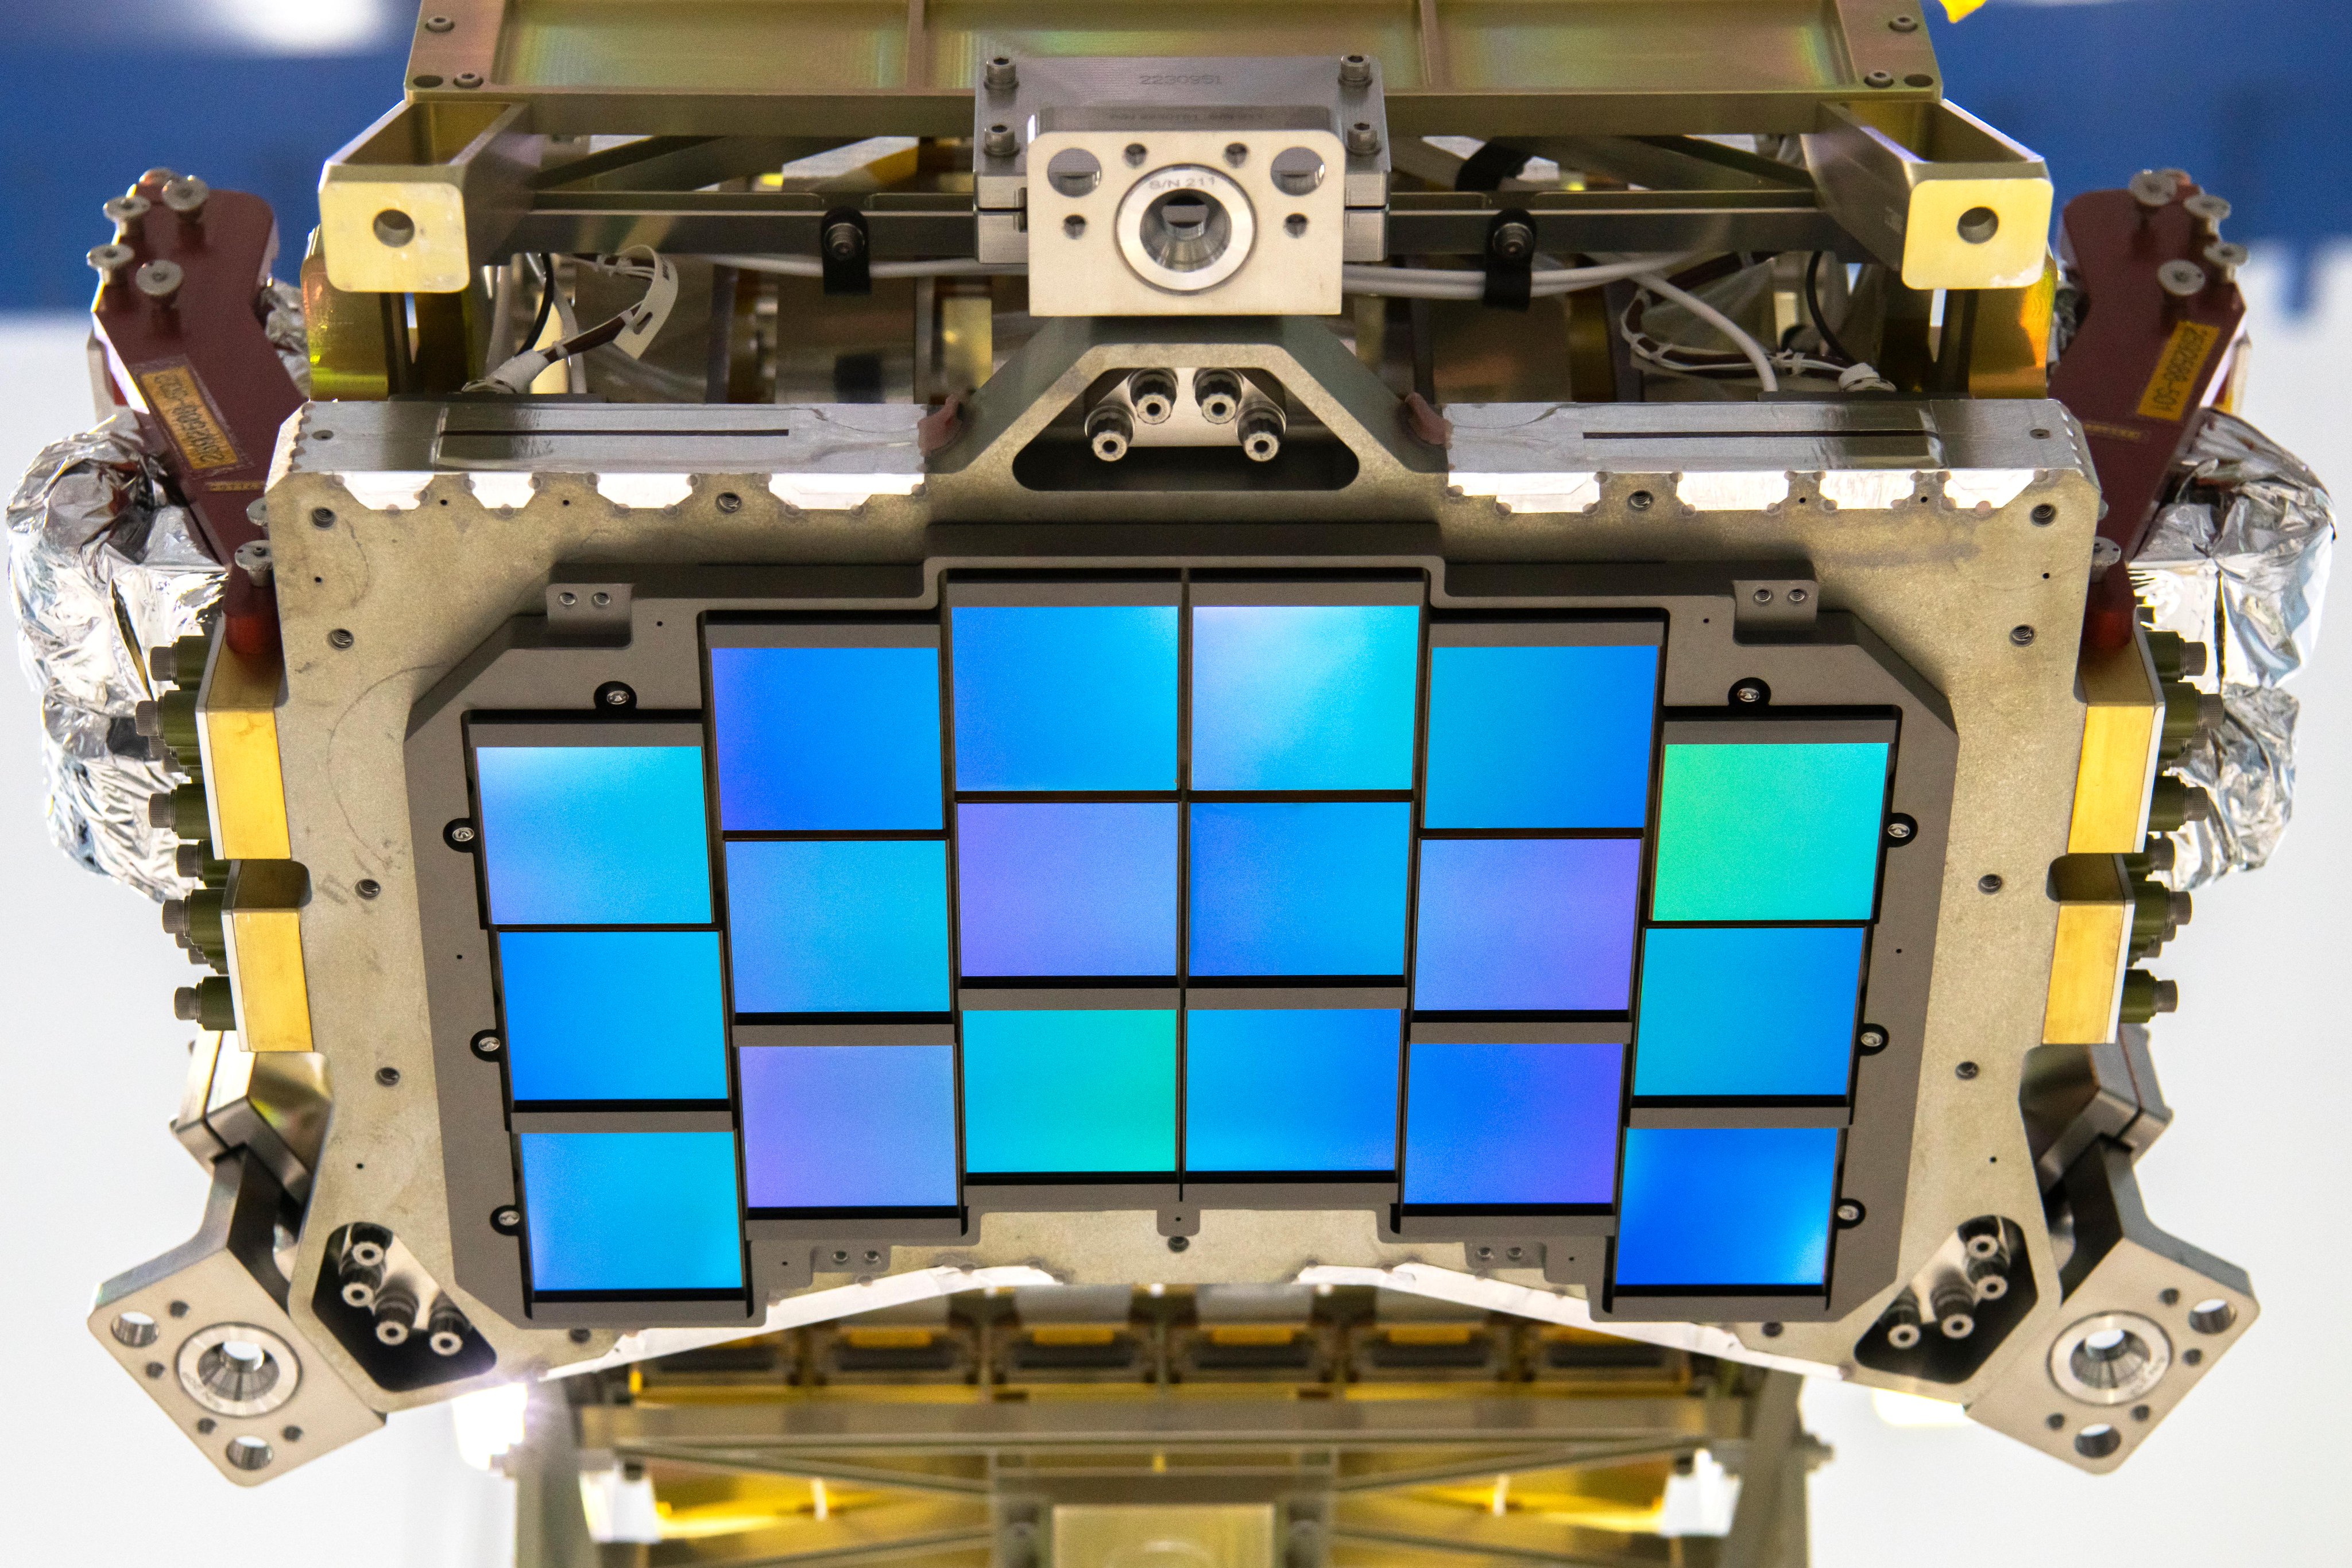 A close-up photo of an iridescent purplish-blue array of squares attached to a chunky, rectangular piece of metal hardware. The structure is about the size of a small microwave, and the array of detectors is arranged in slightly curved rows. 